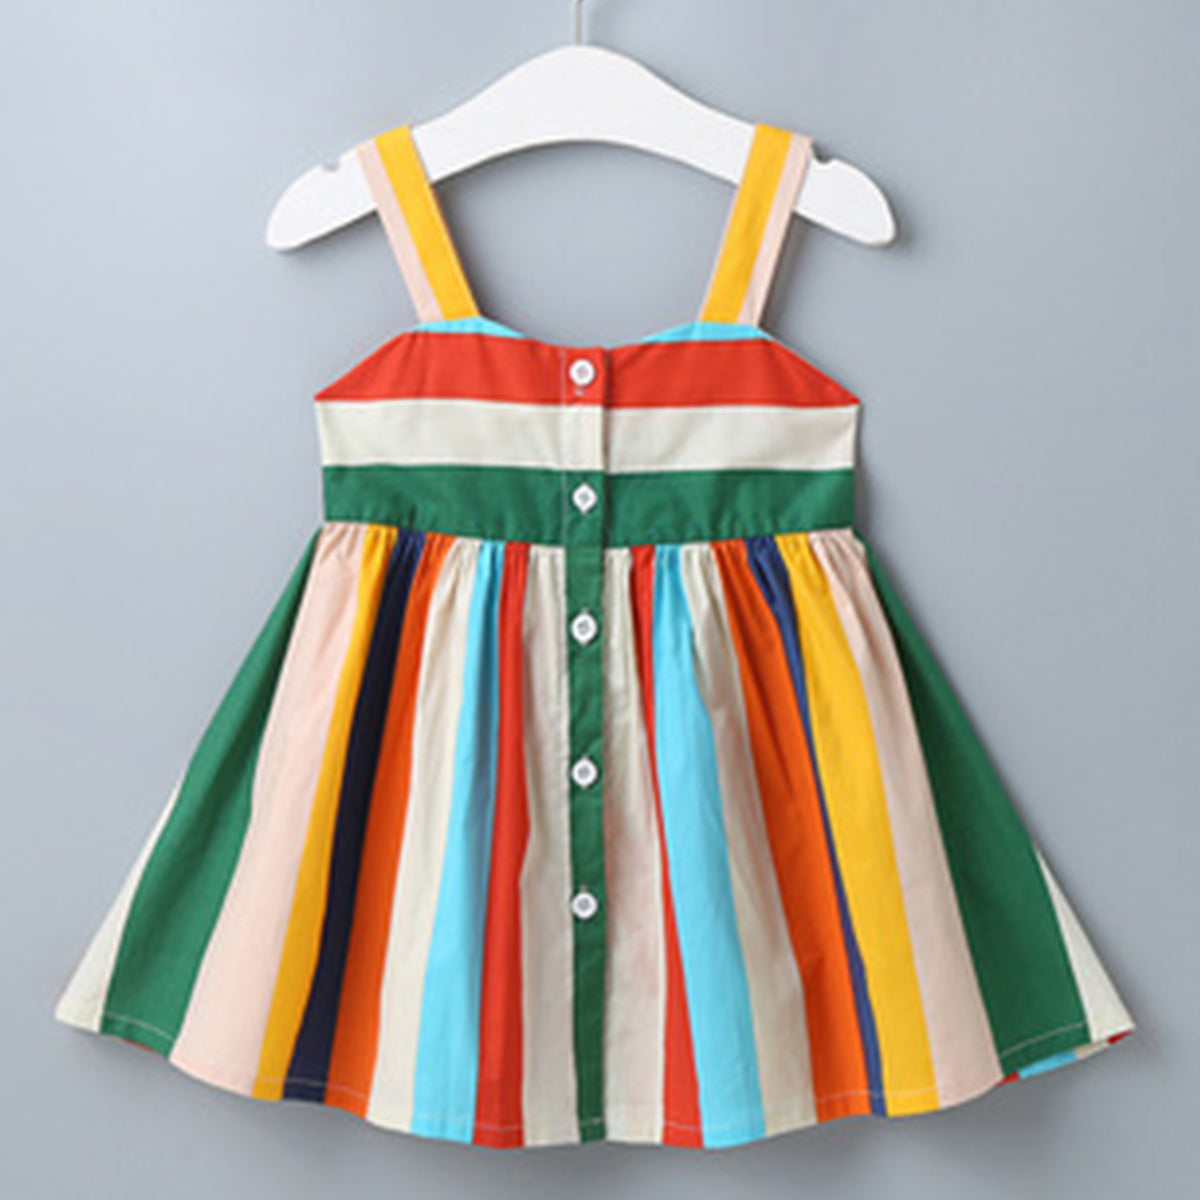 BabyGirl's Multicolor Strip Tunic Dress & Black Strip Top Sleeveless And Shorts (Combo Pack Of 2) for Kids.